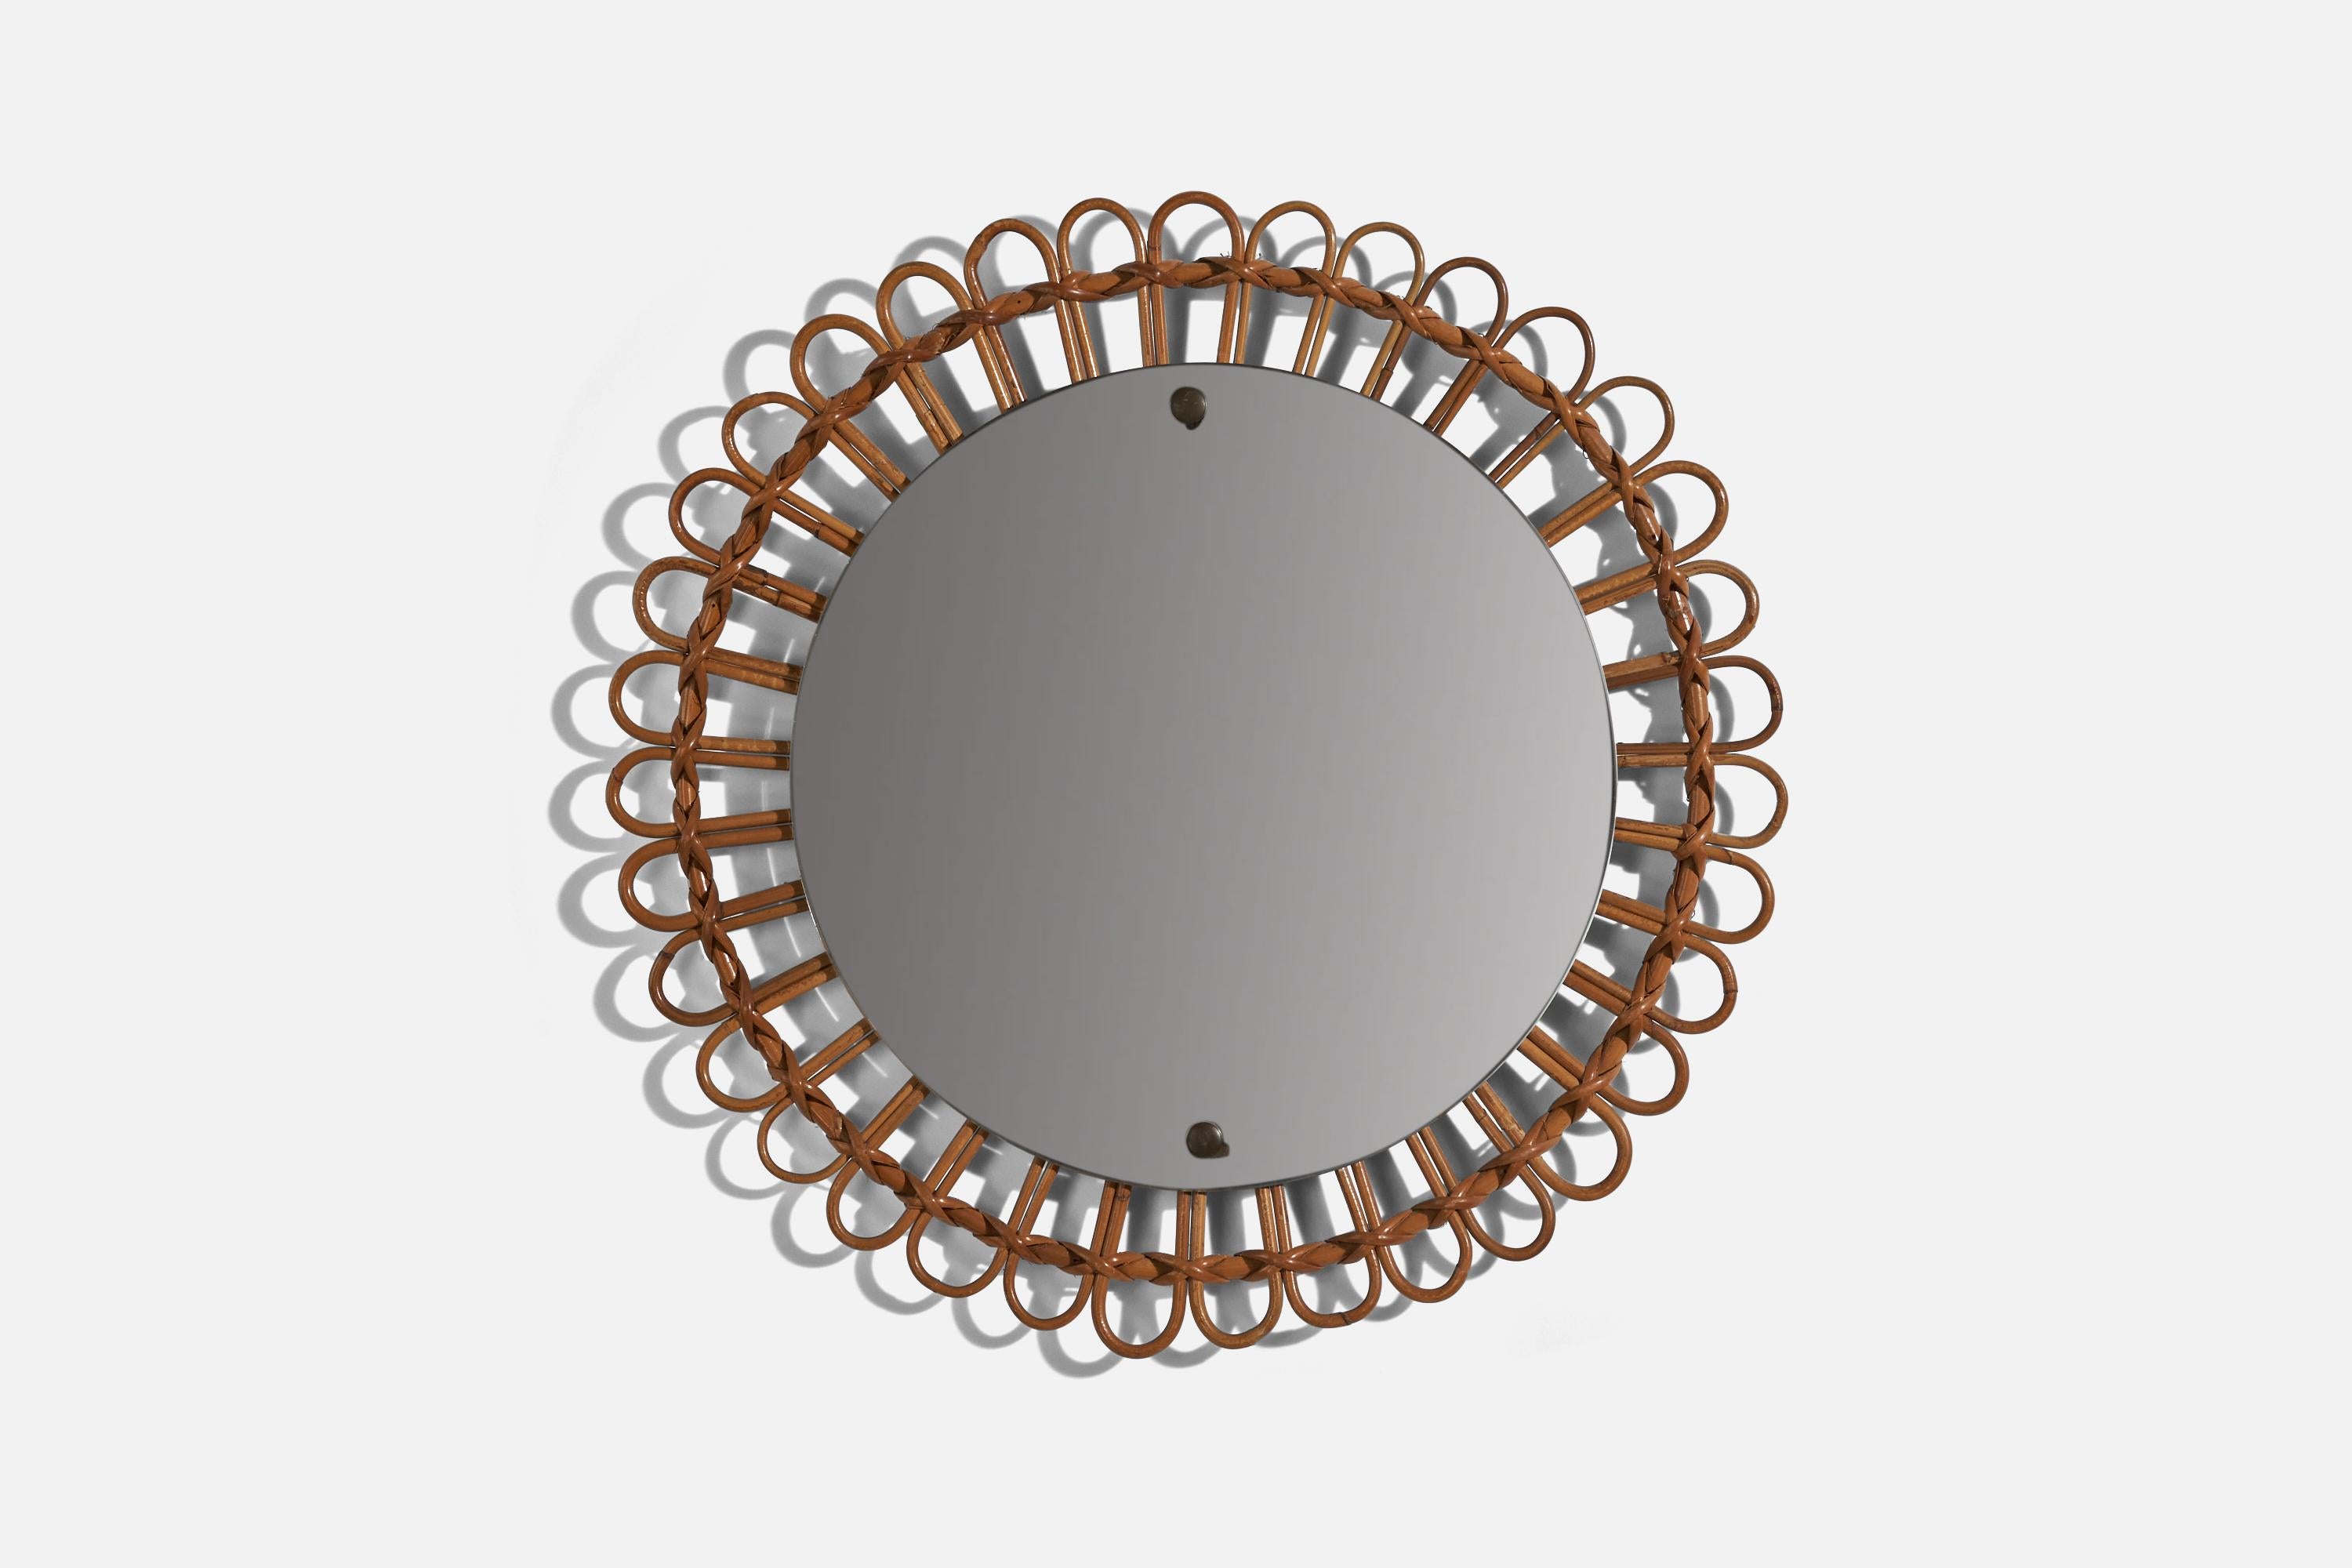 A bamboo and rattan wall mirror designed and produced in Italy, 1950s.